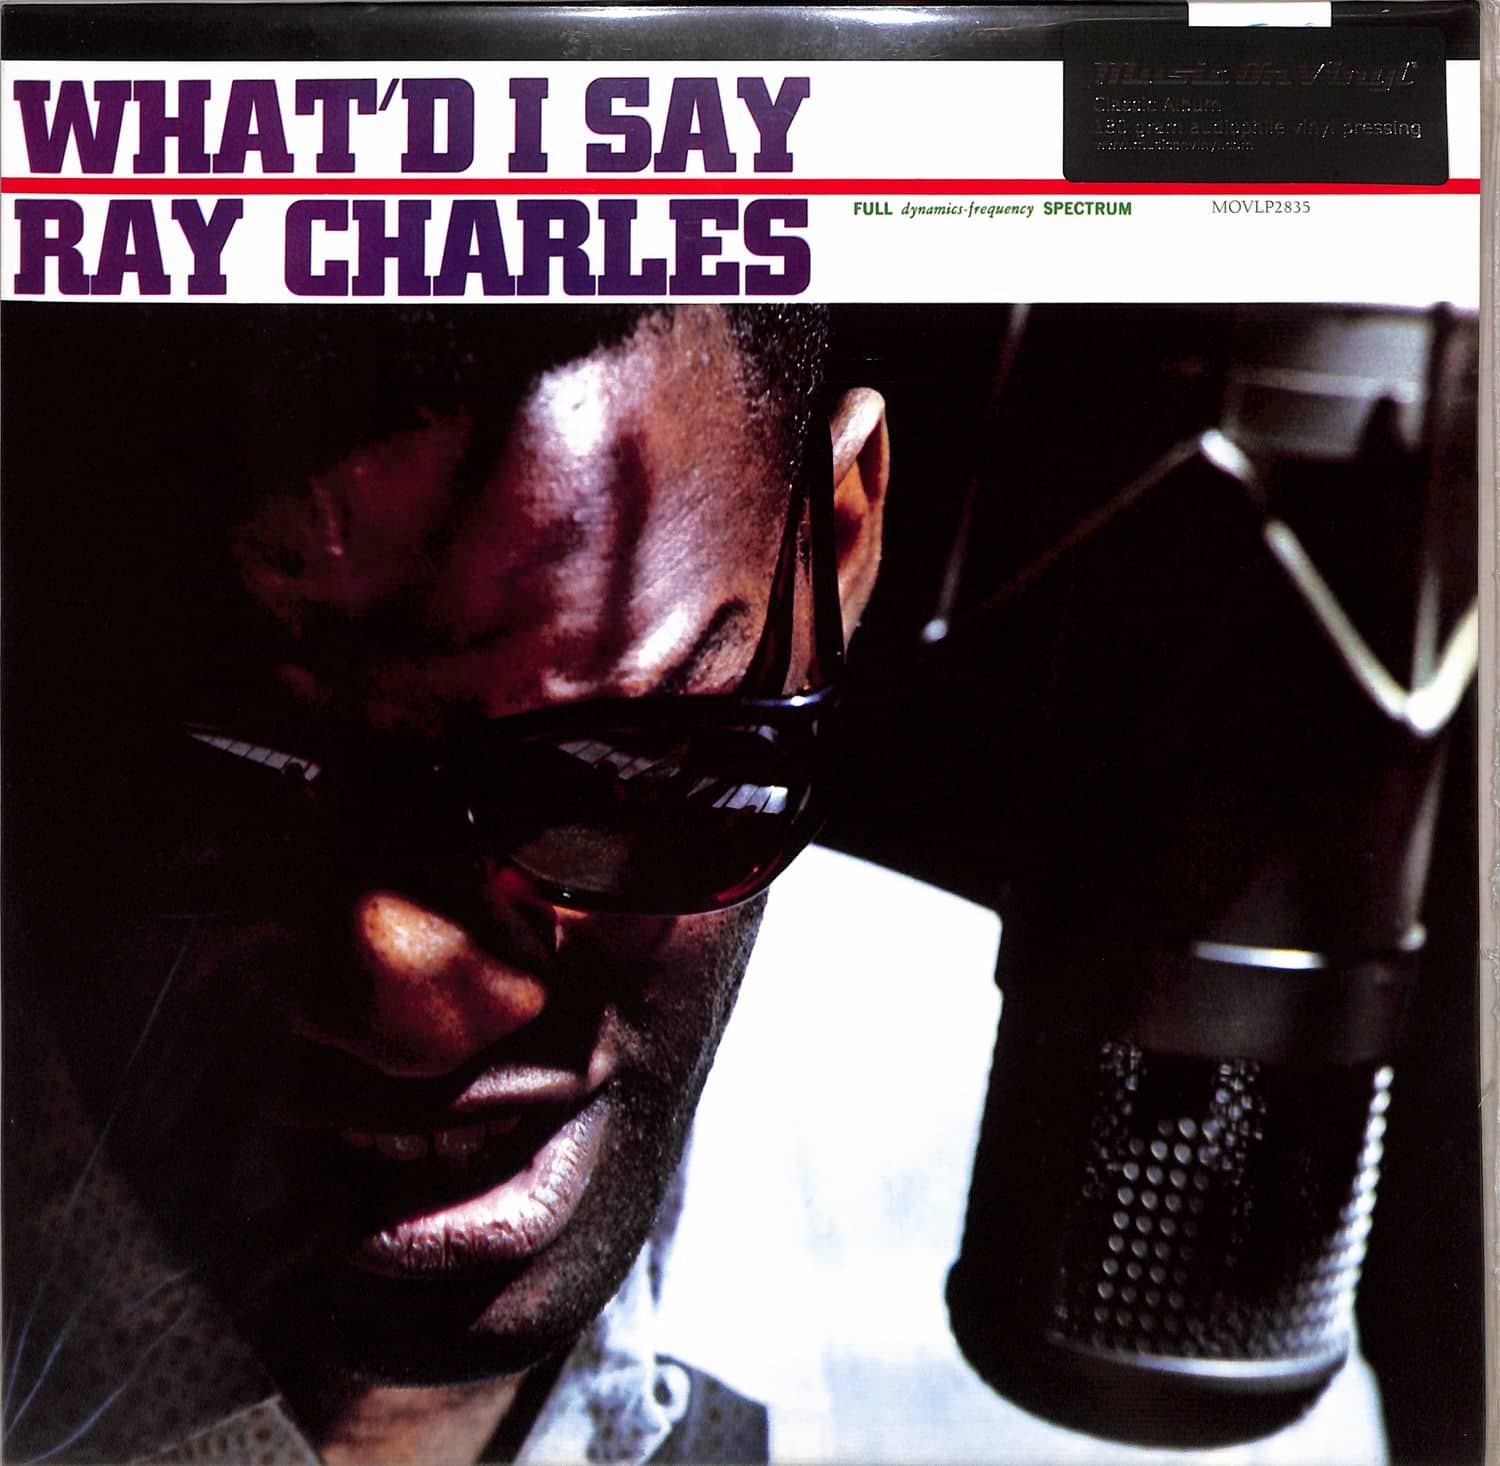 Ray Charles - WHAT D I SAY 